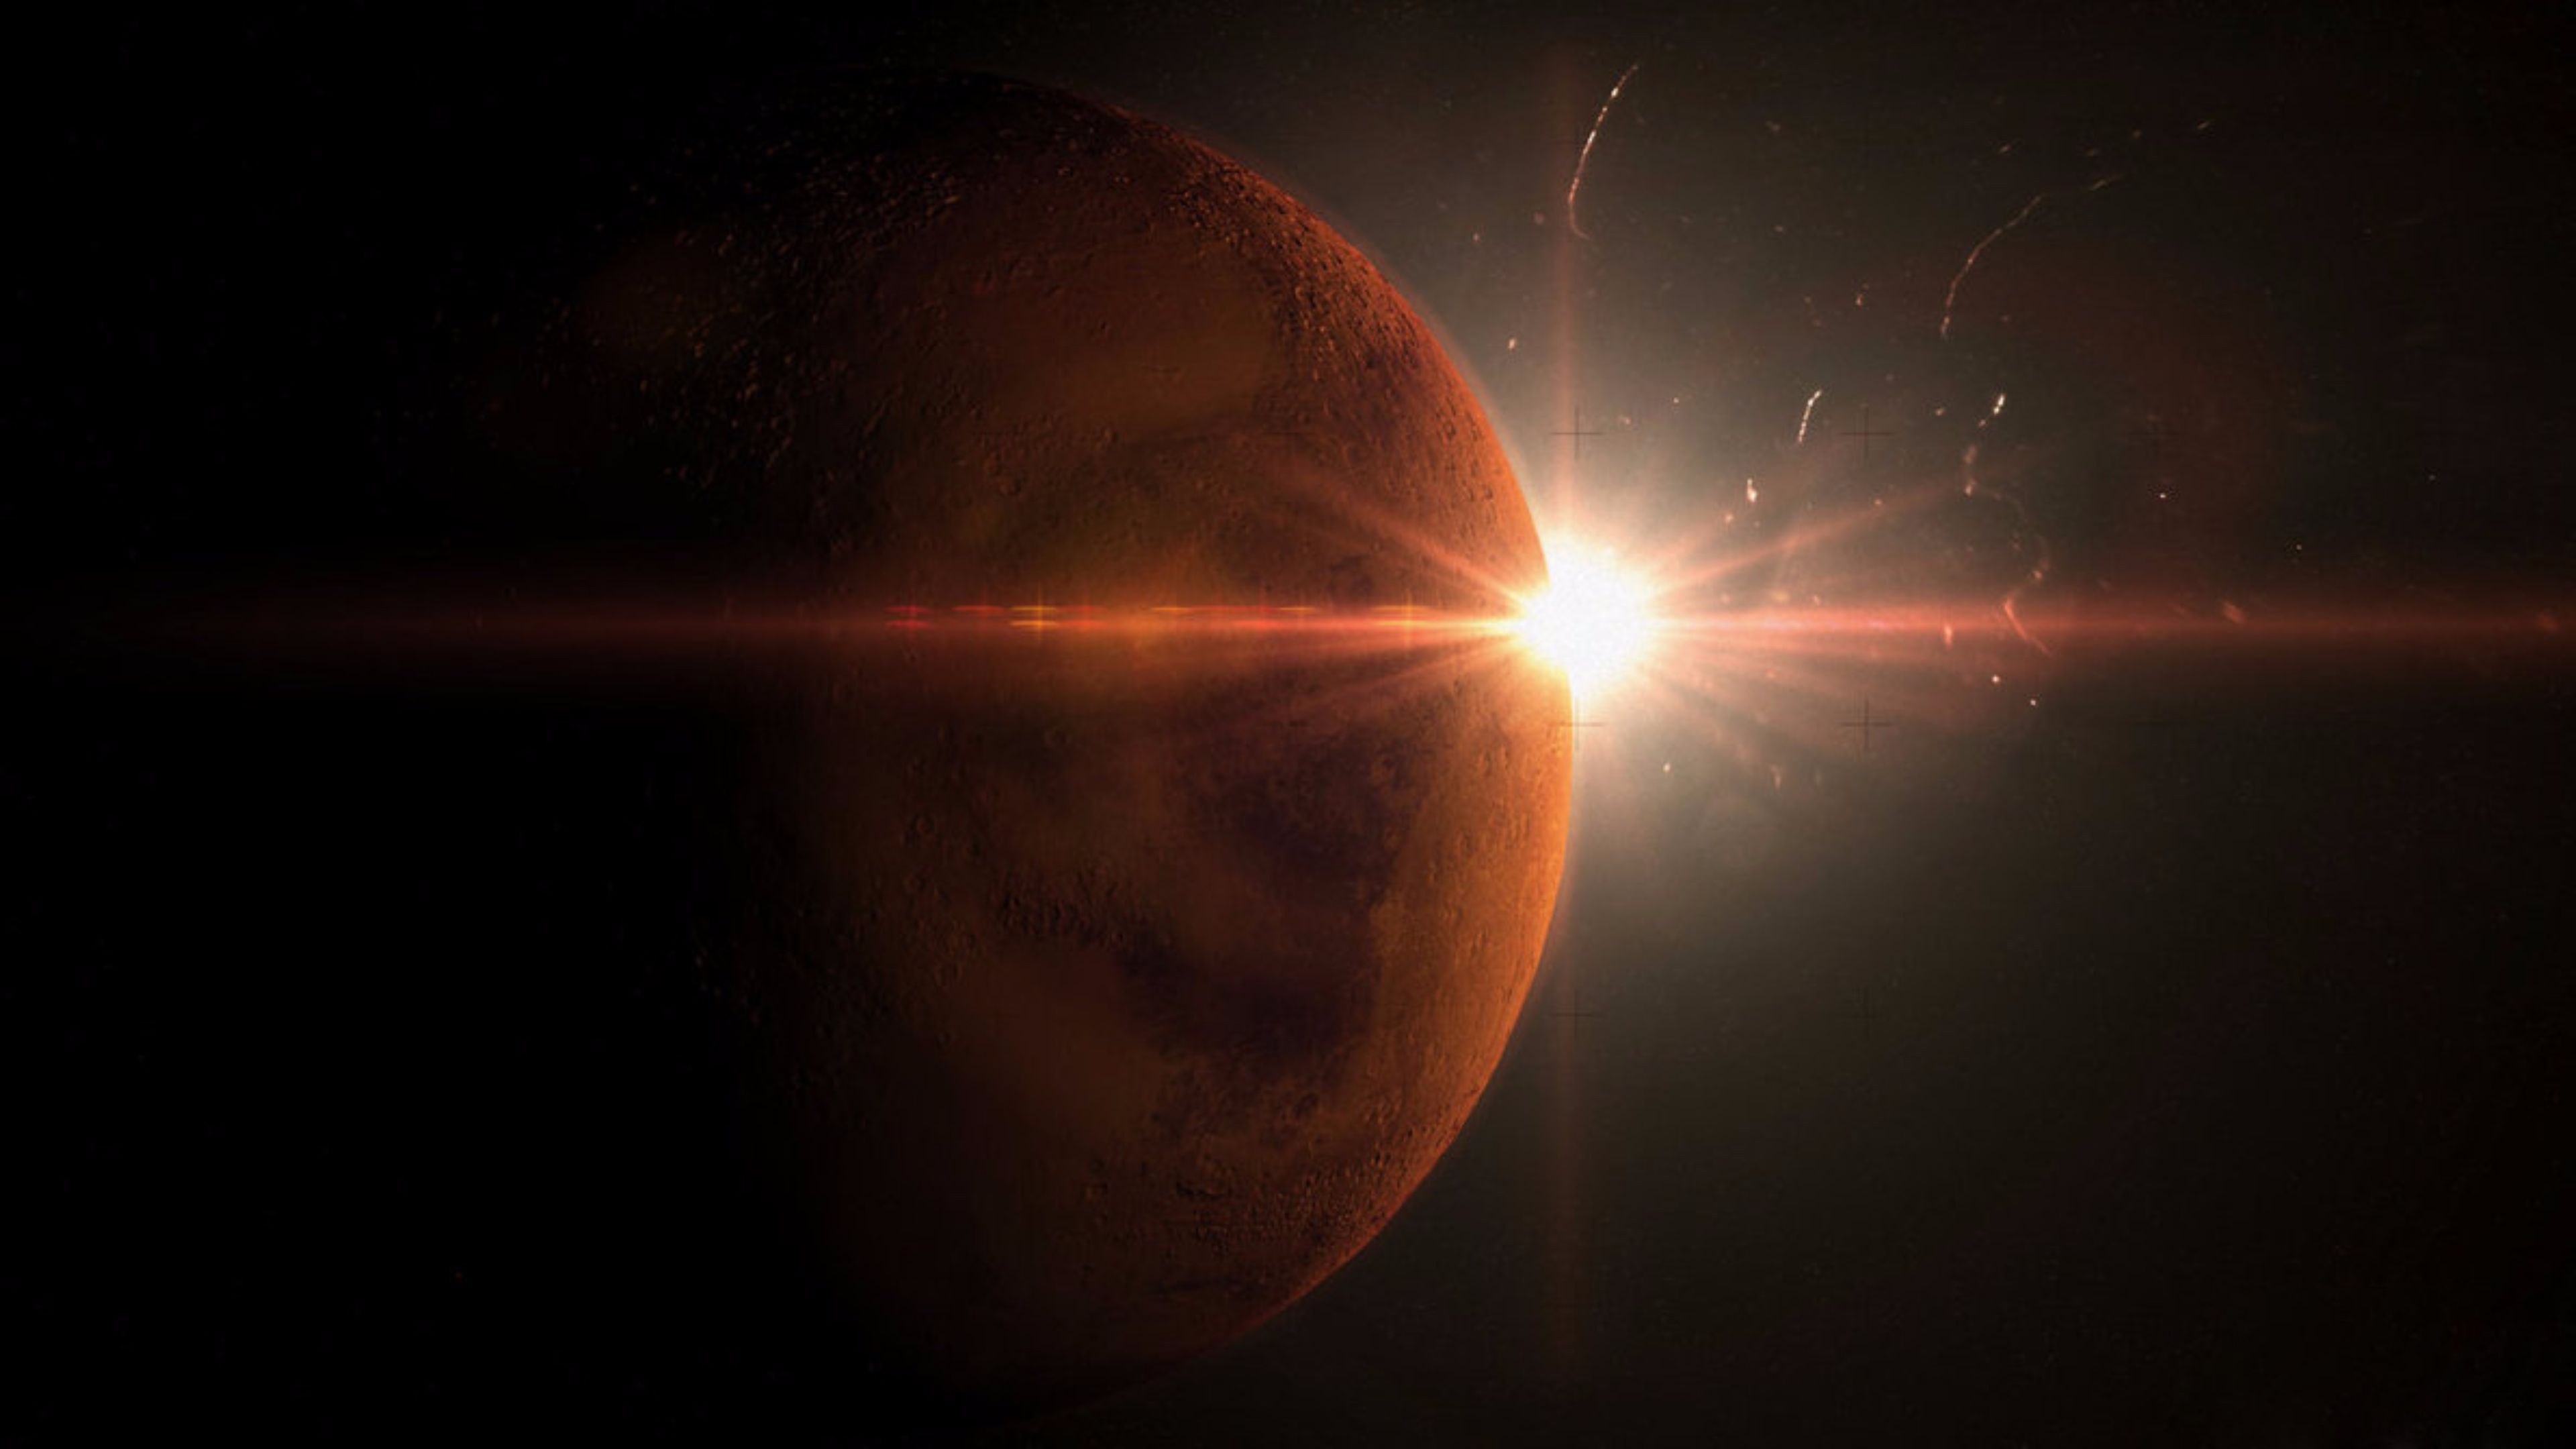 A planet with a sun behind it - Mars